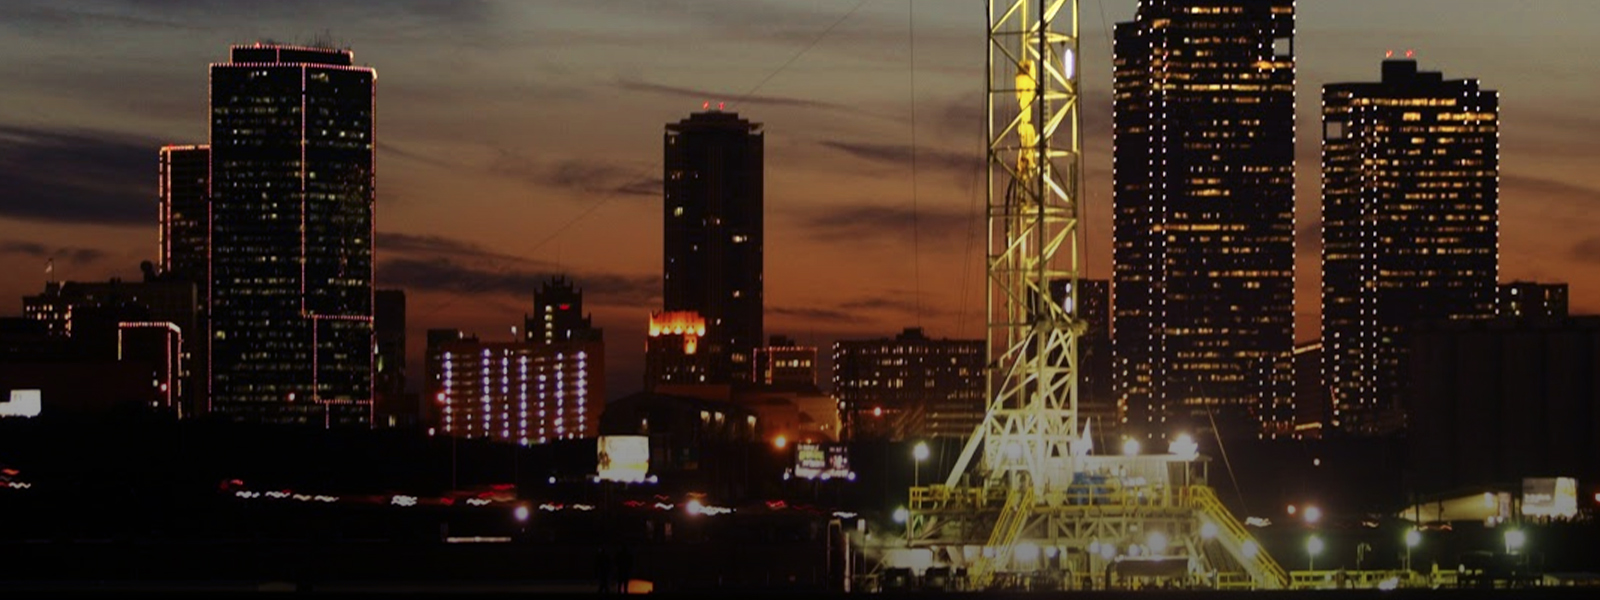 Image showing a rig near a city skyline